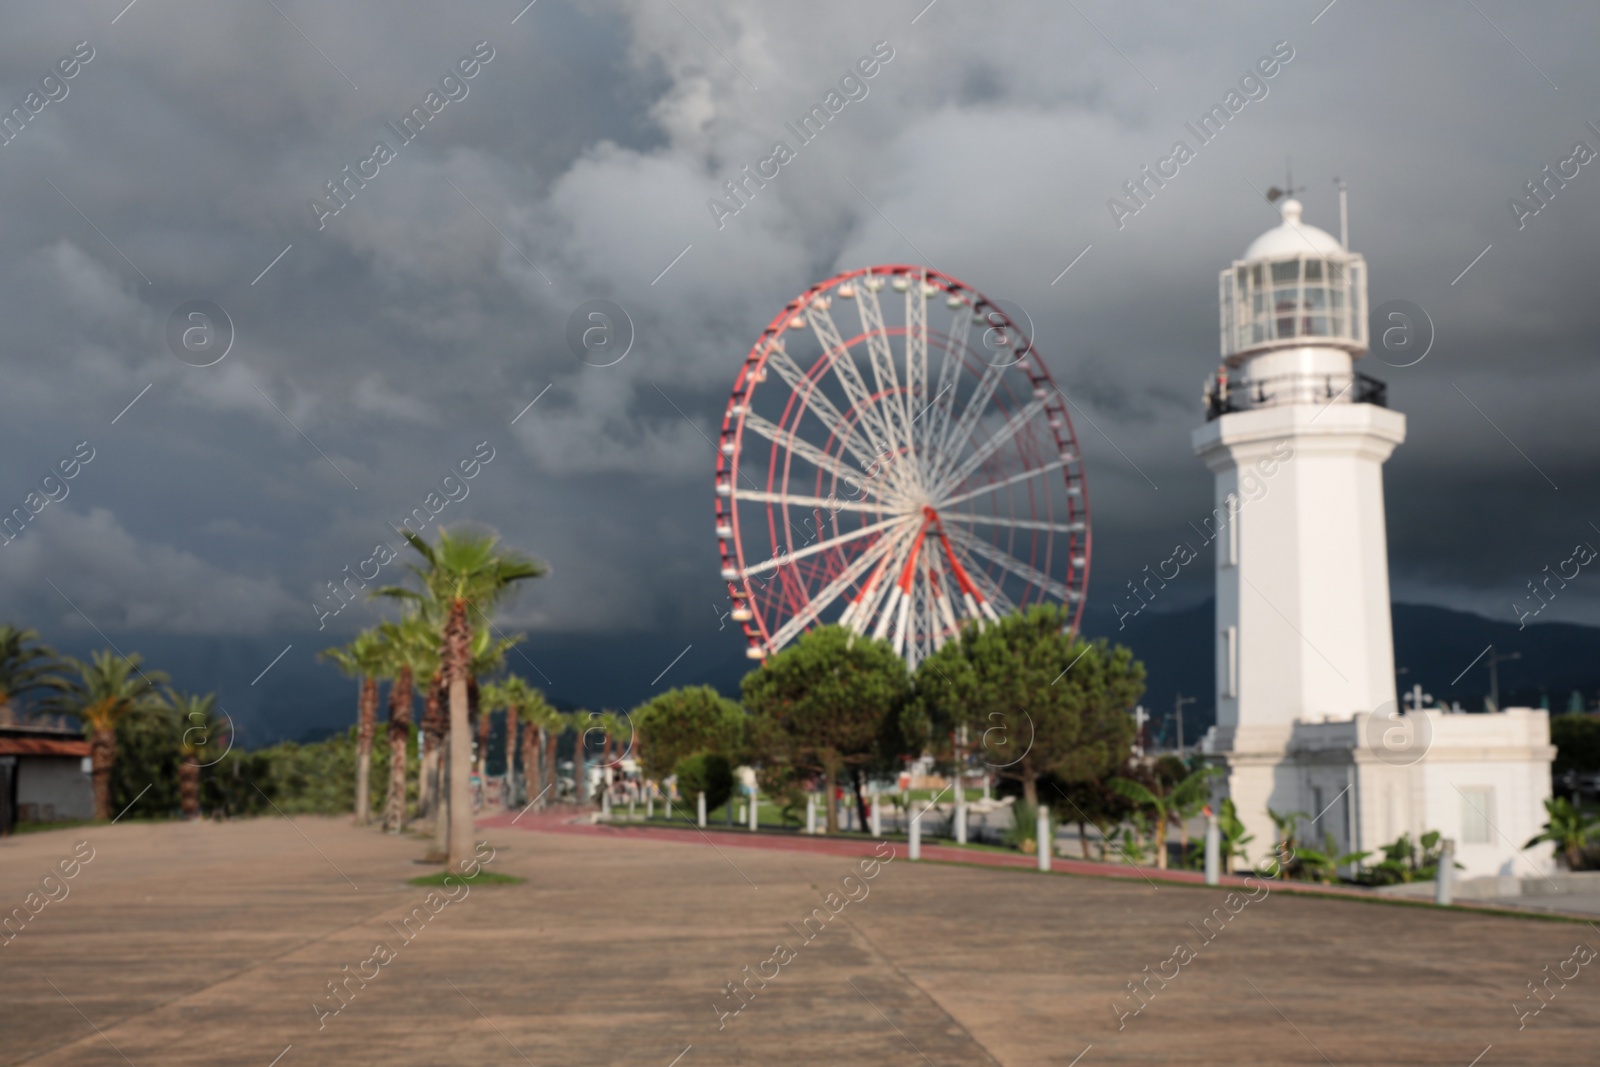 Photo of Blurred view of large Ferris wheel and lighthouse under rainy clouds